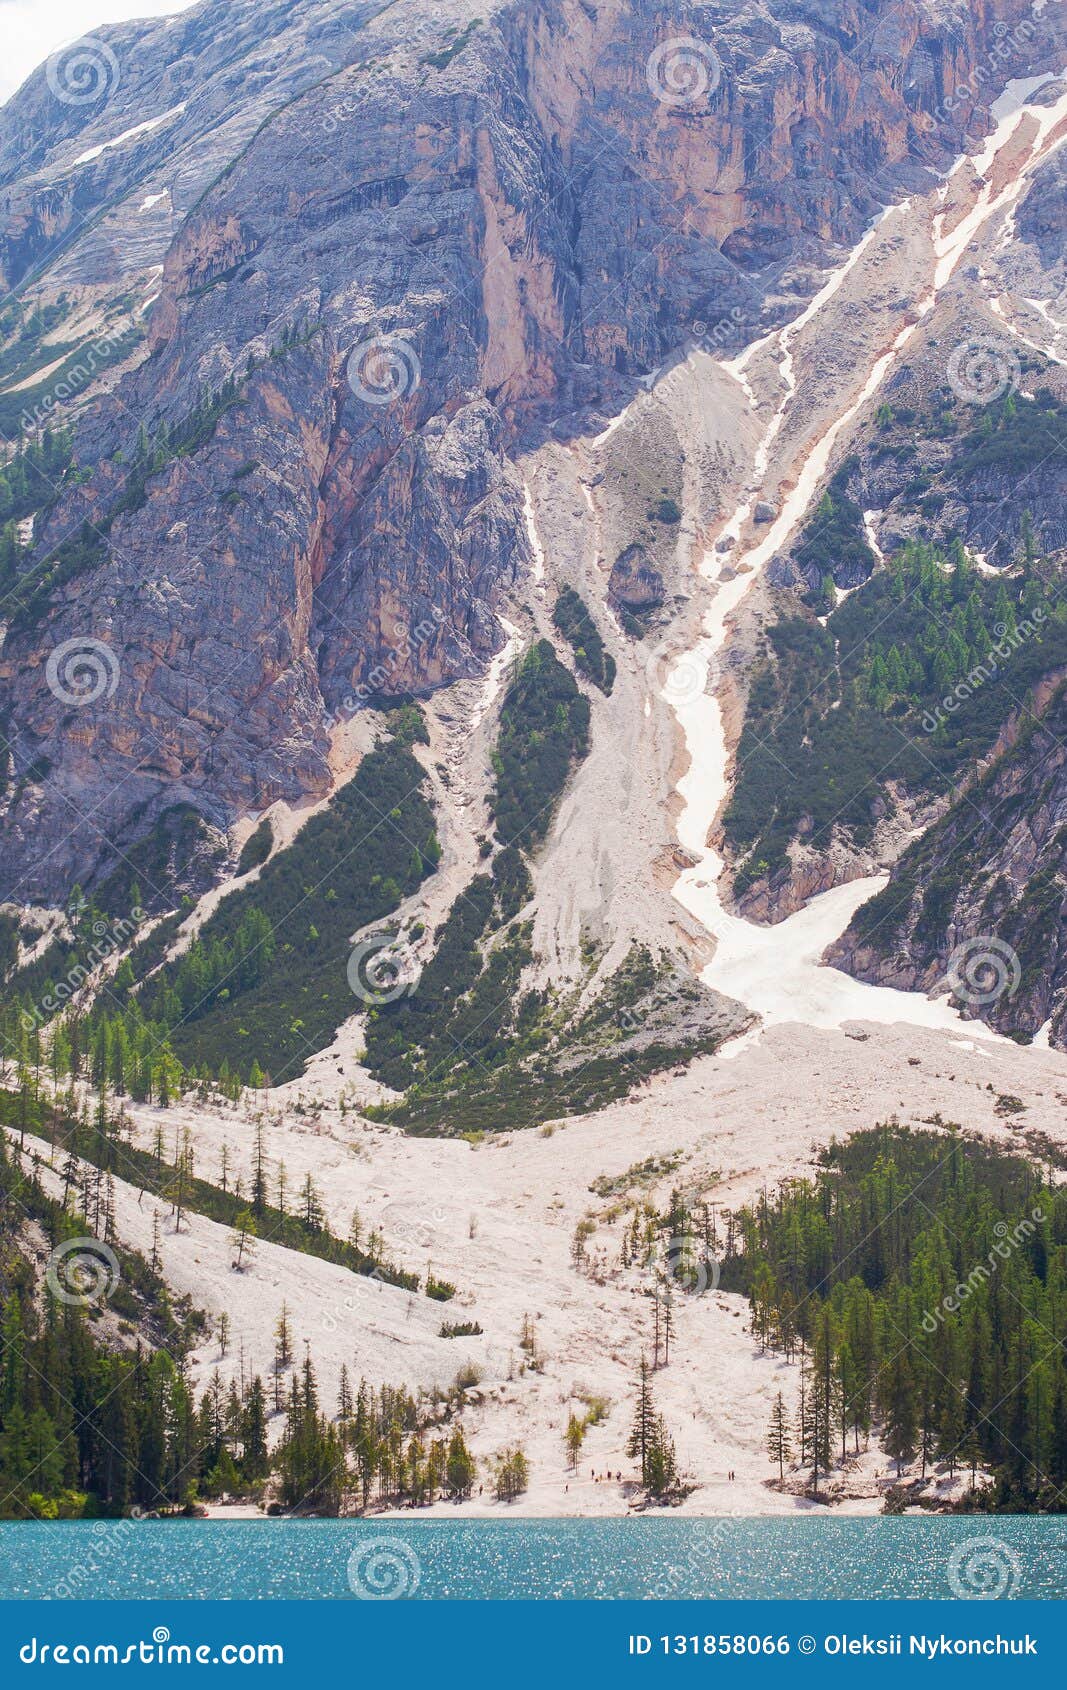 mudflow with snow high in the alpine mountains lake, lago di braies